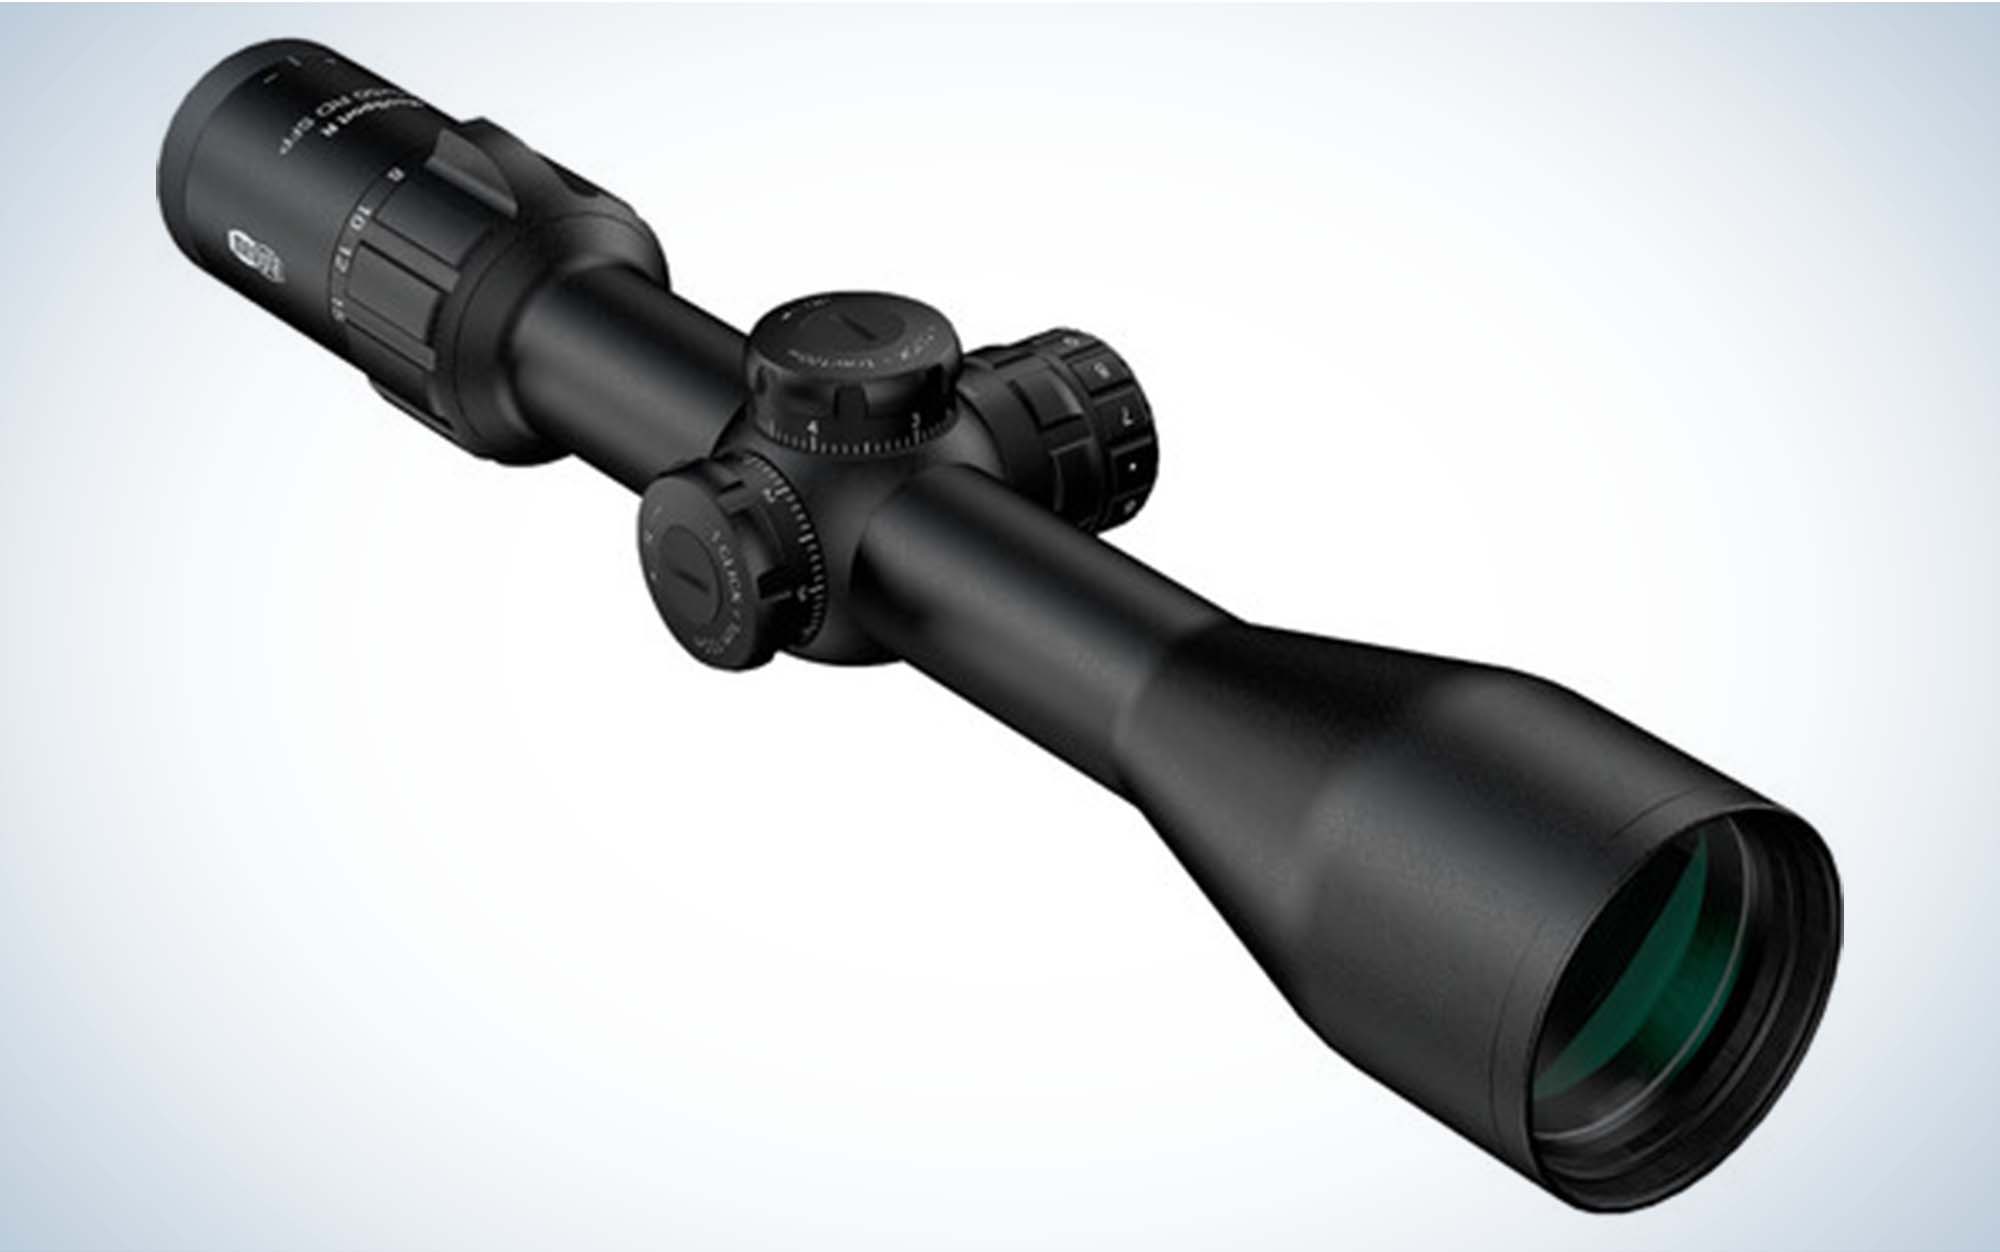 The Meopta MeoSport R 3-15x50 is the best low-light rifle scope.